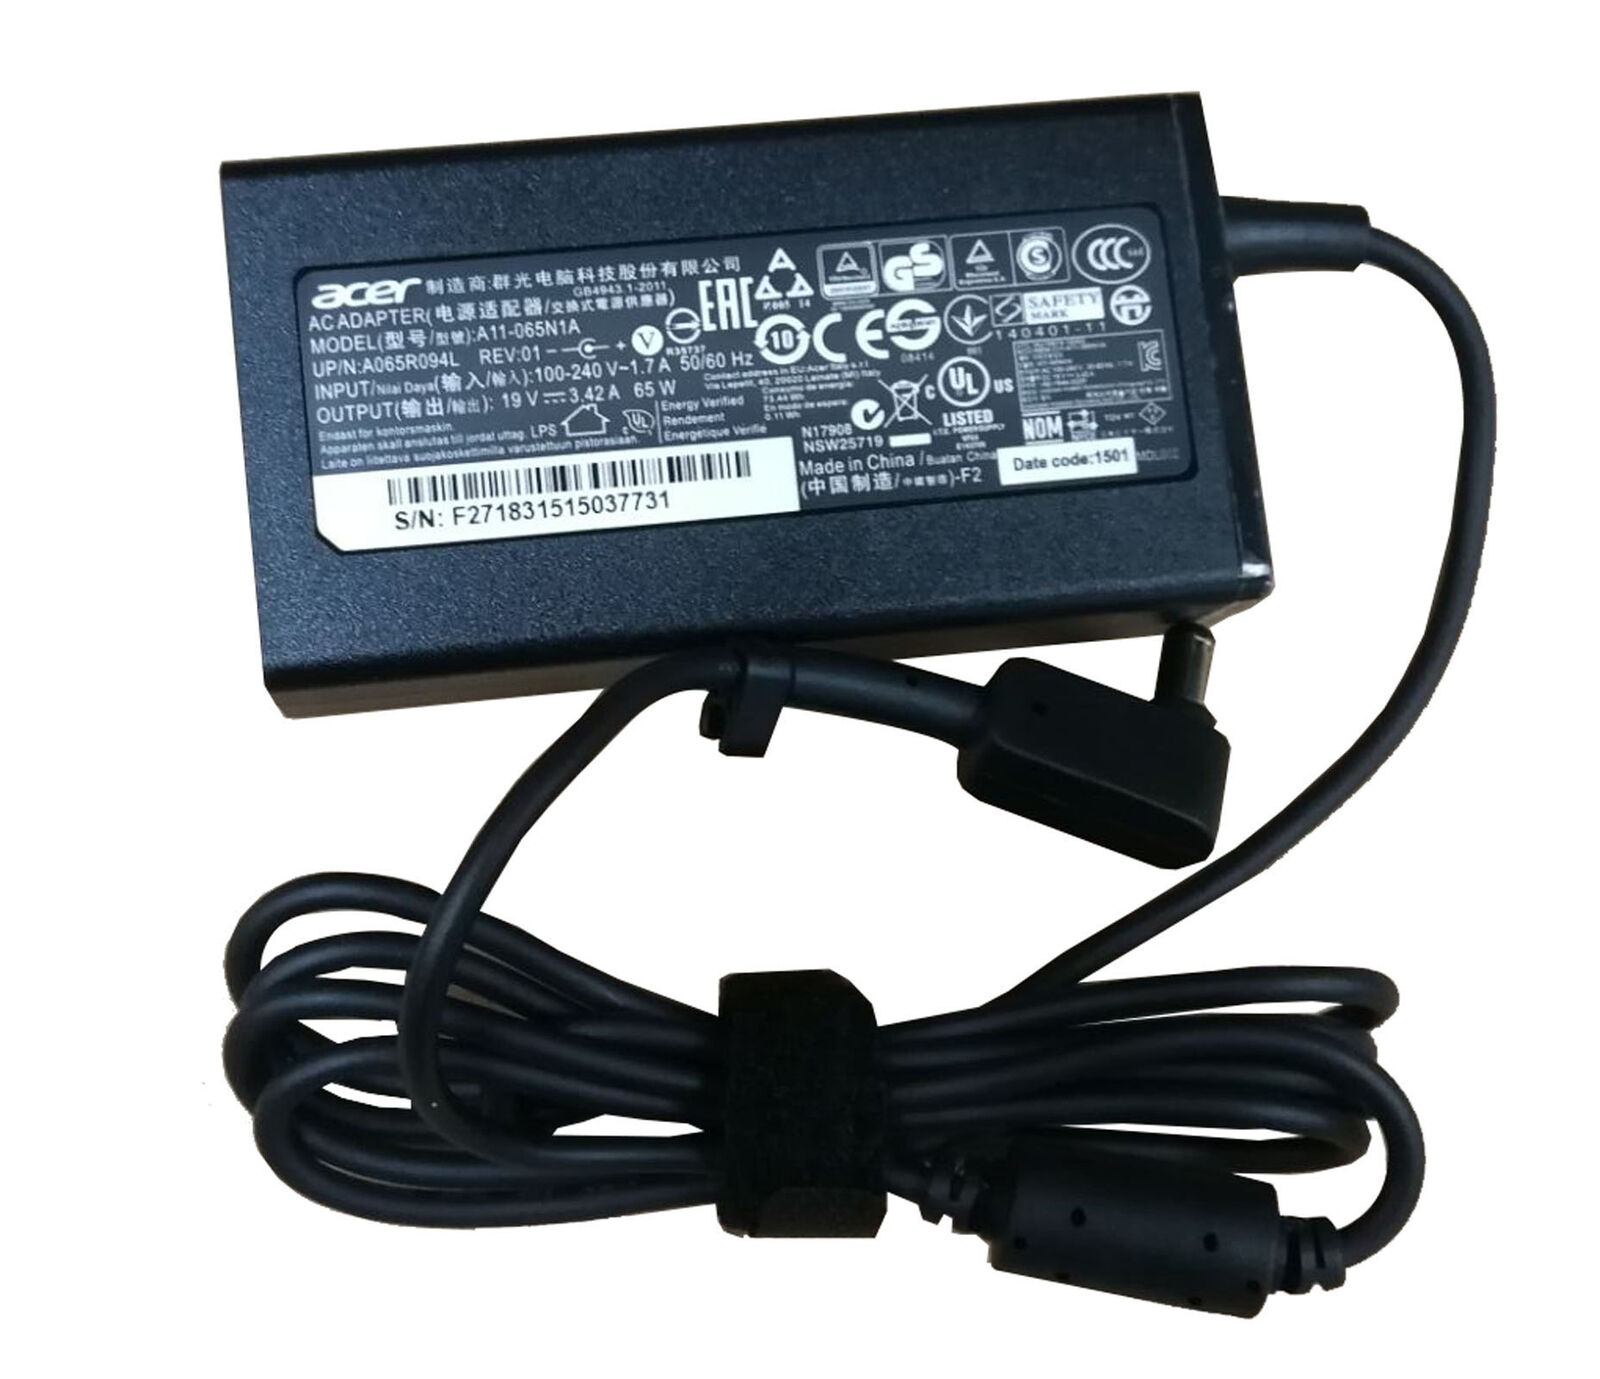 65W Acer Chromebook CB5-571-C09S Charger AC Adapter Power Cord